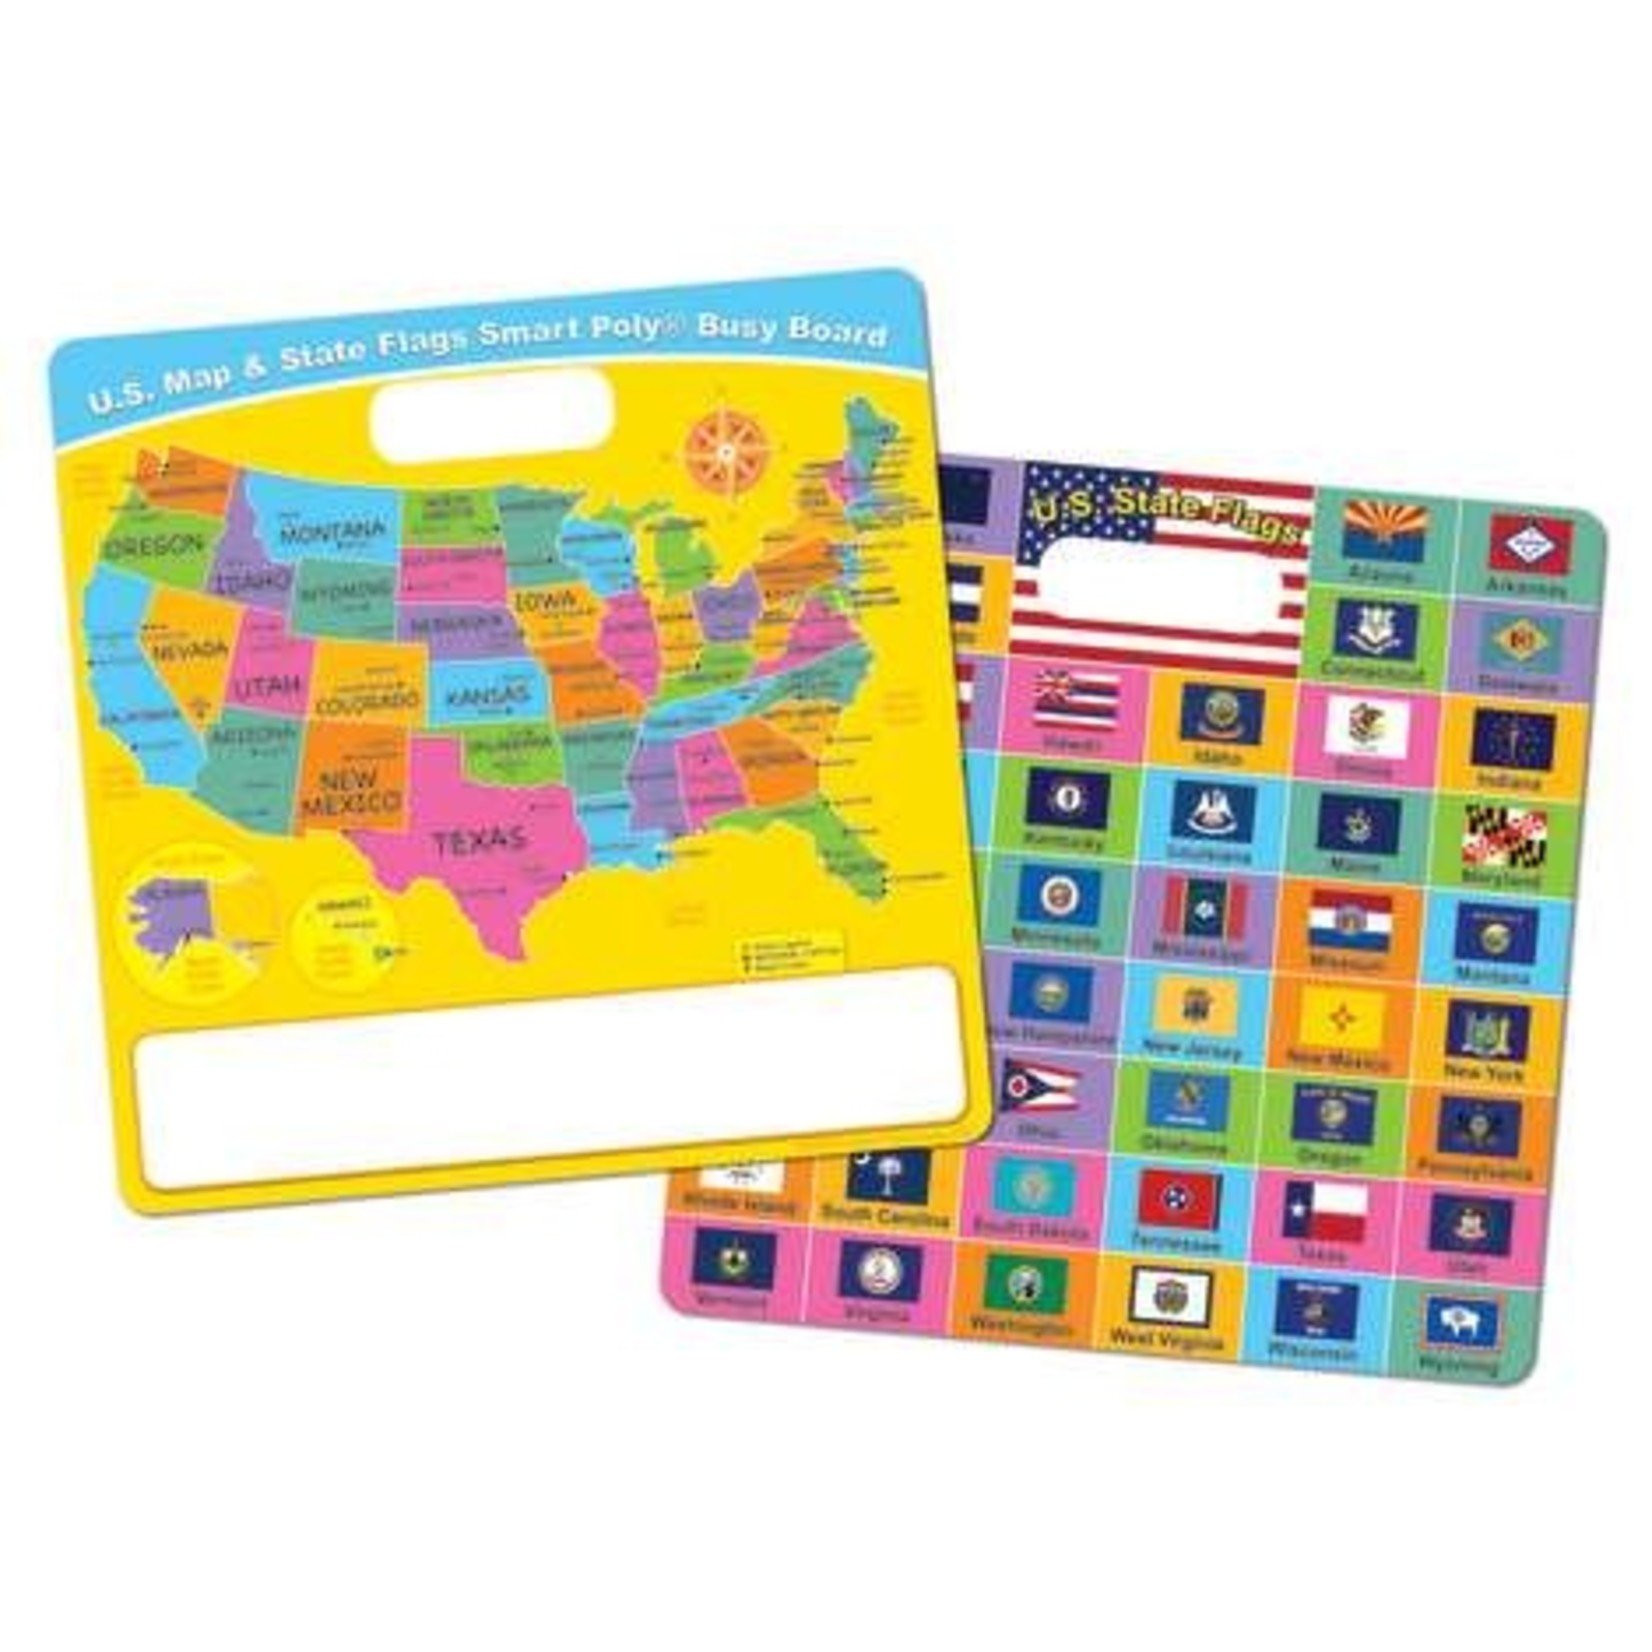 ASHLEY INCORPORATED Smart Poly® Busy Boards, US Map/State Flags